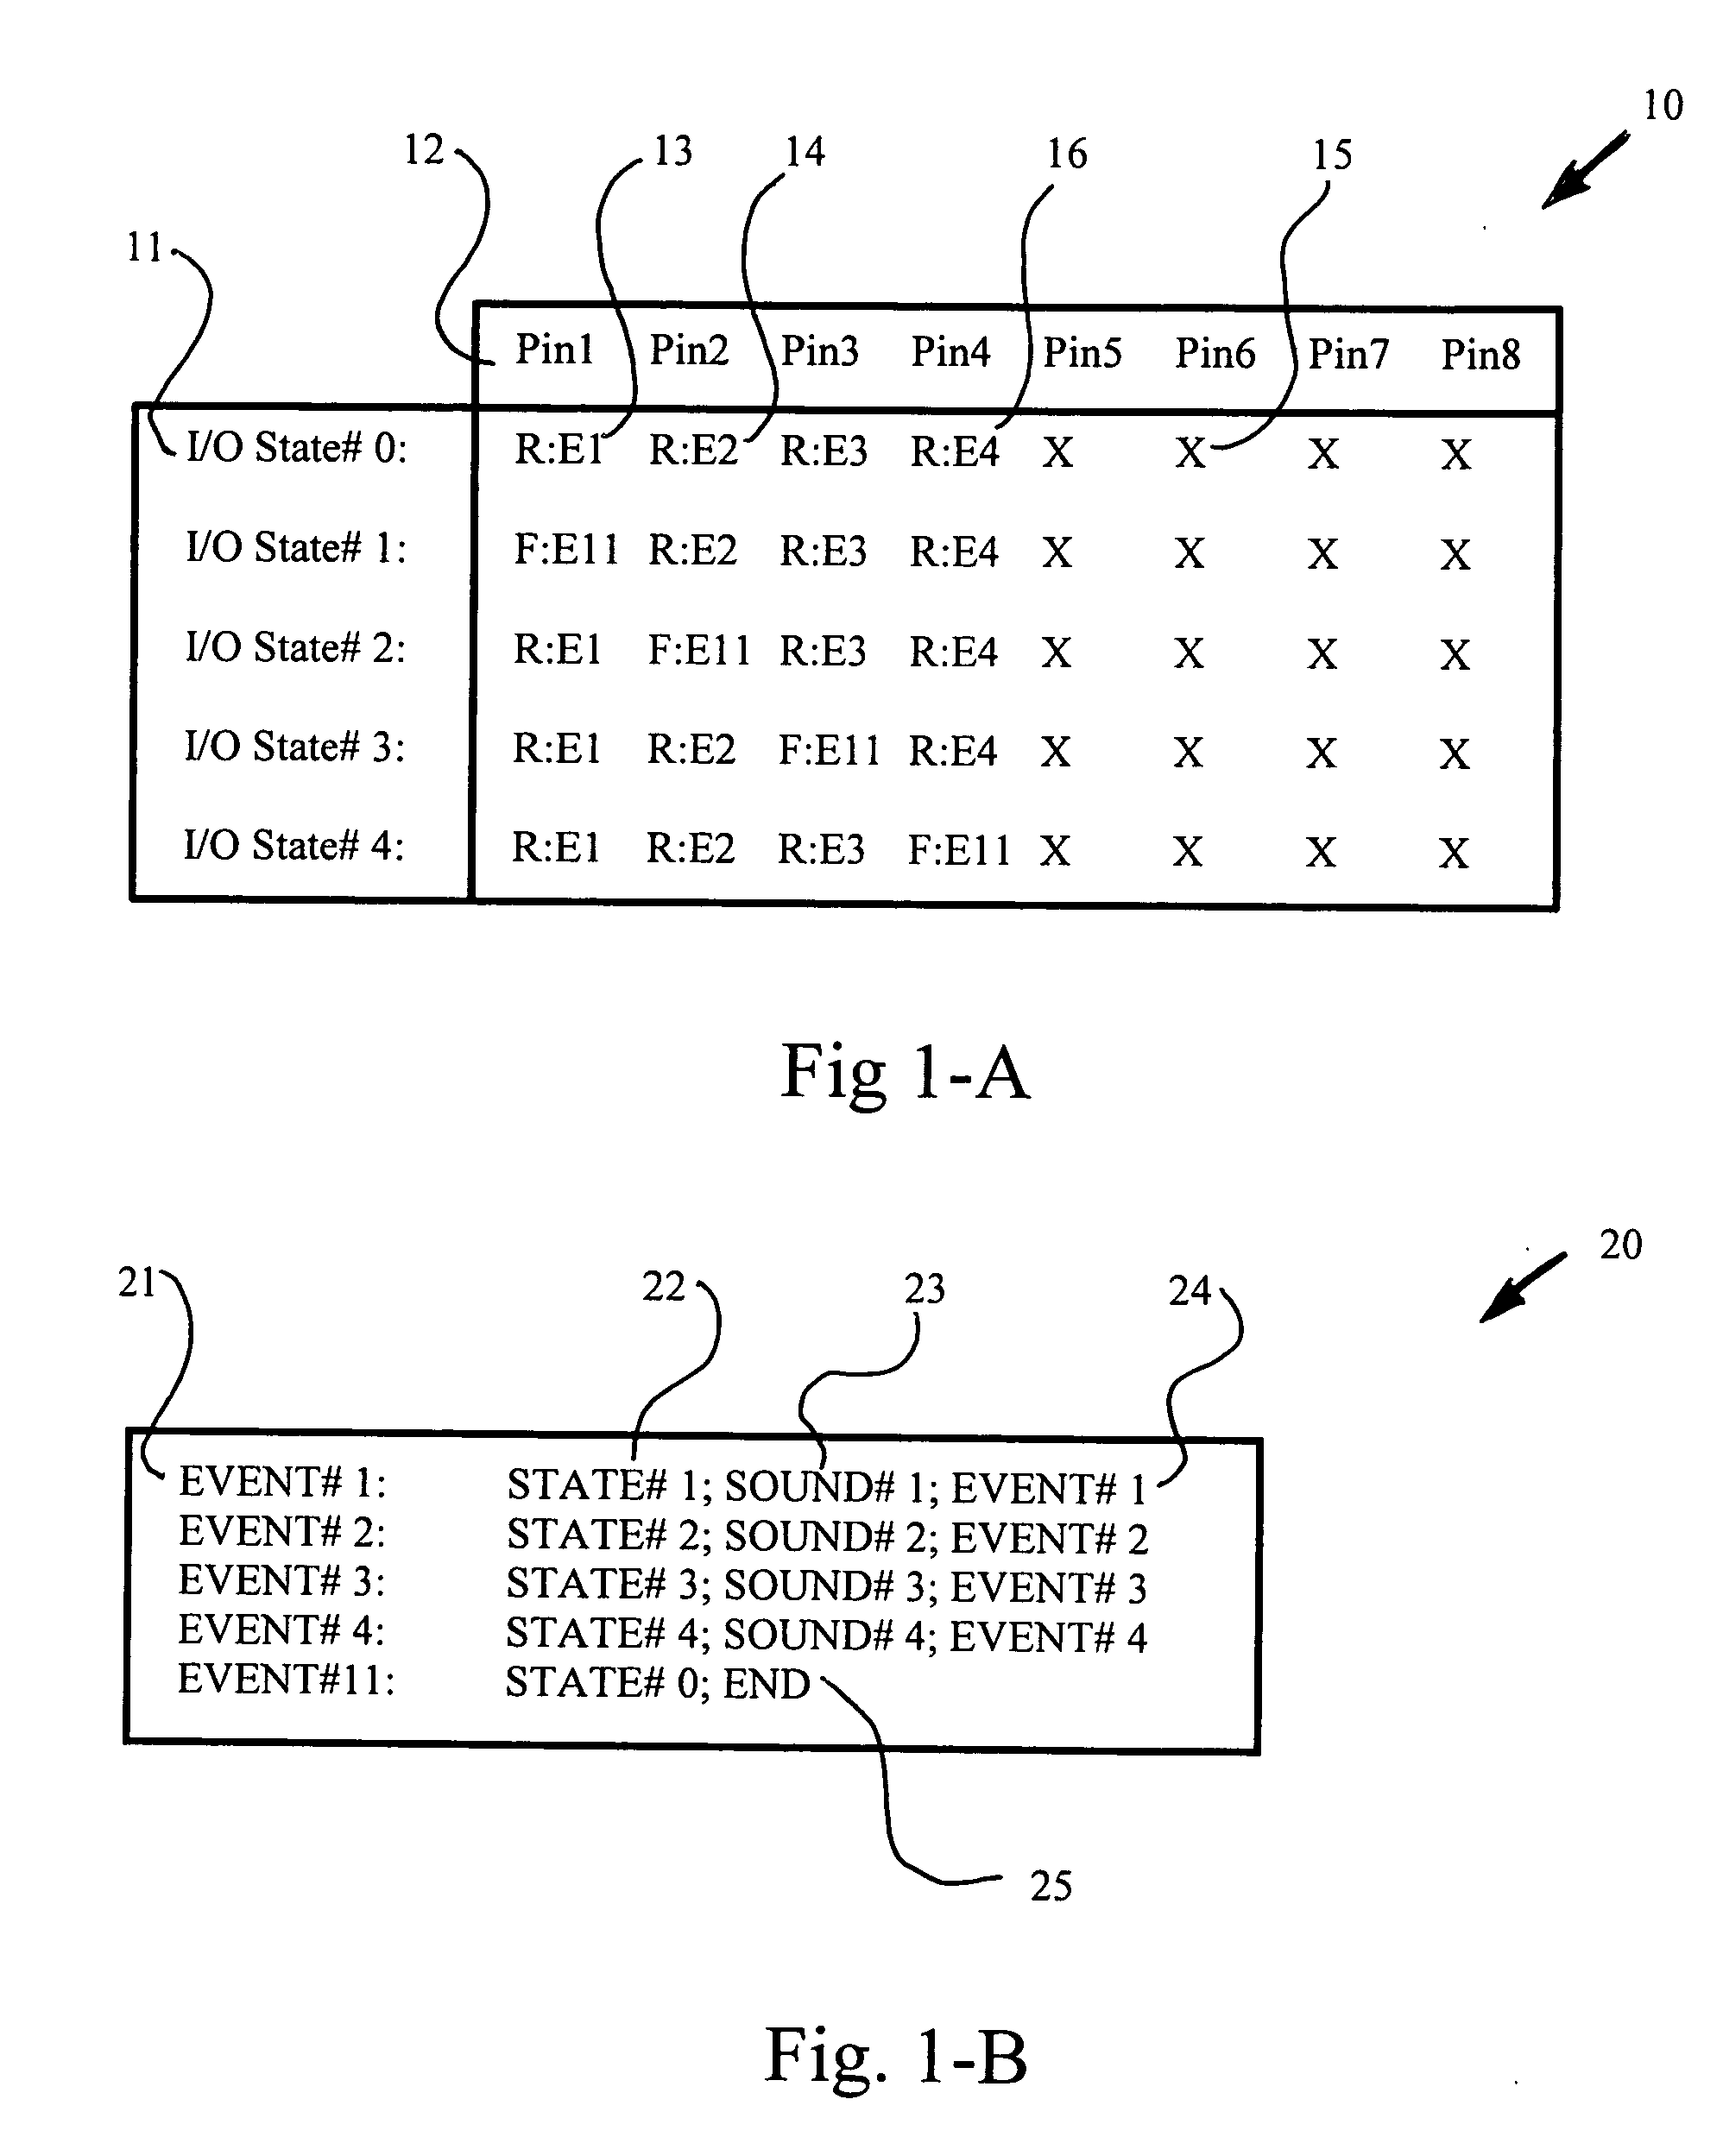 Cloud computing system configured for a consumer to program a smart phone or touch pad